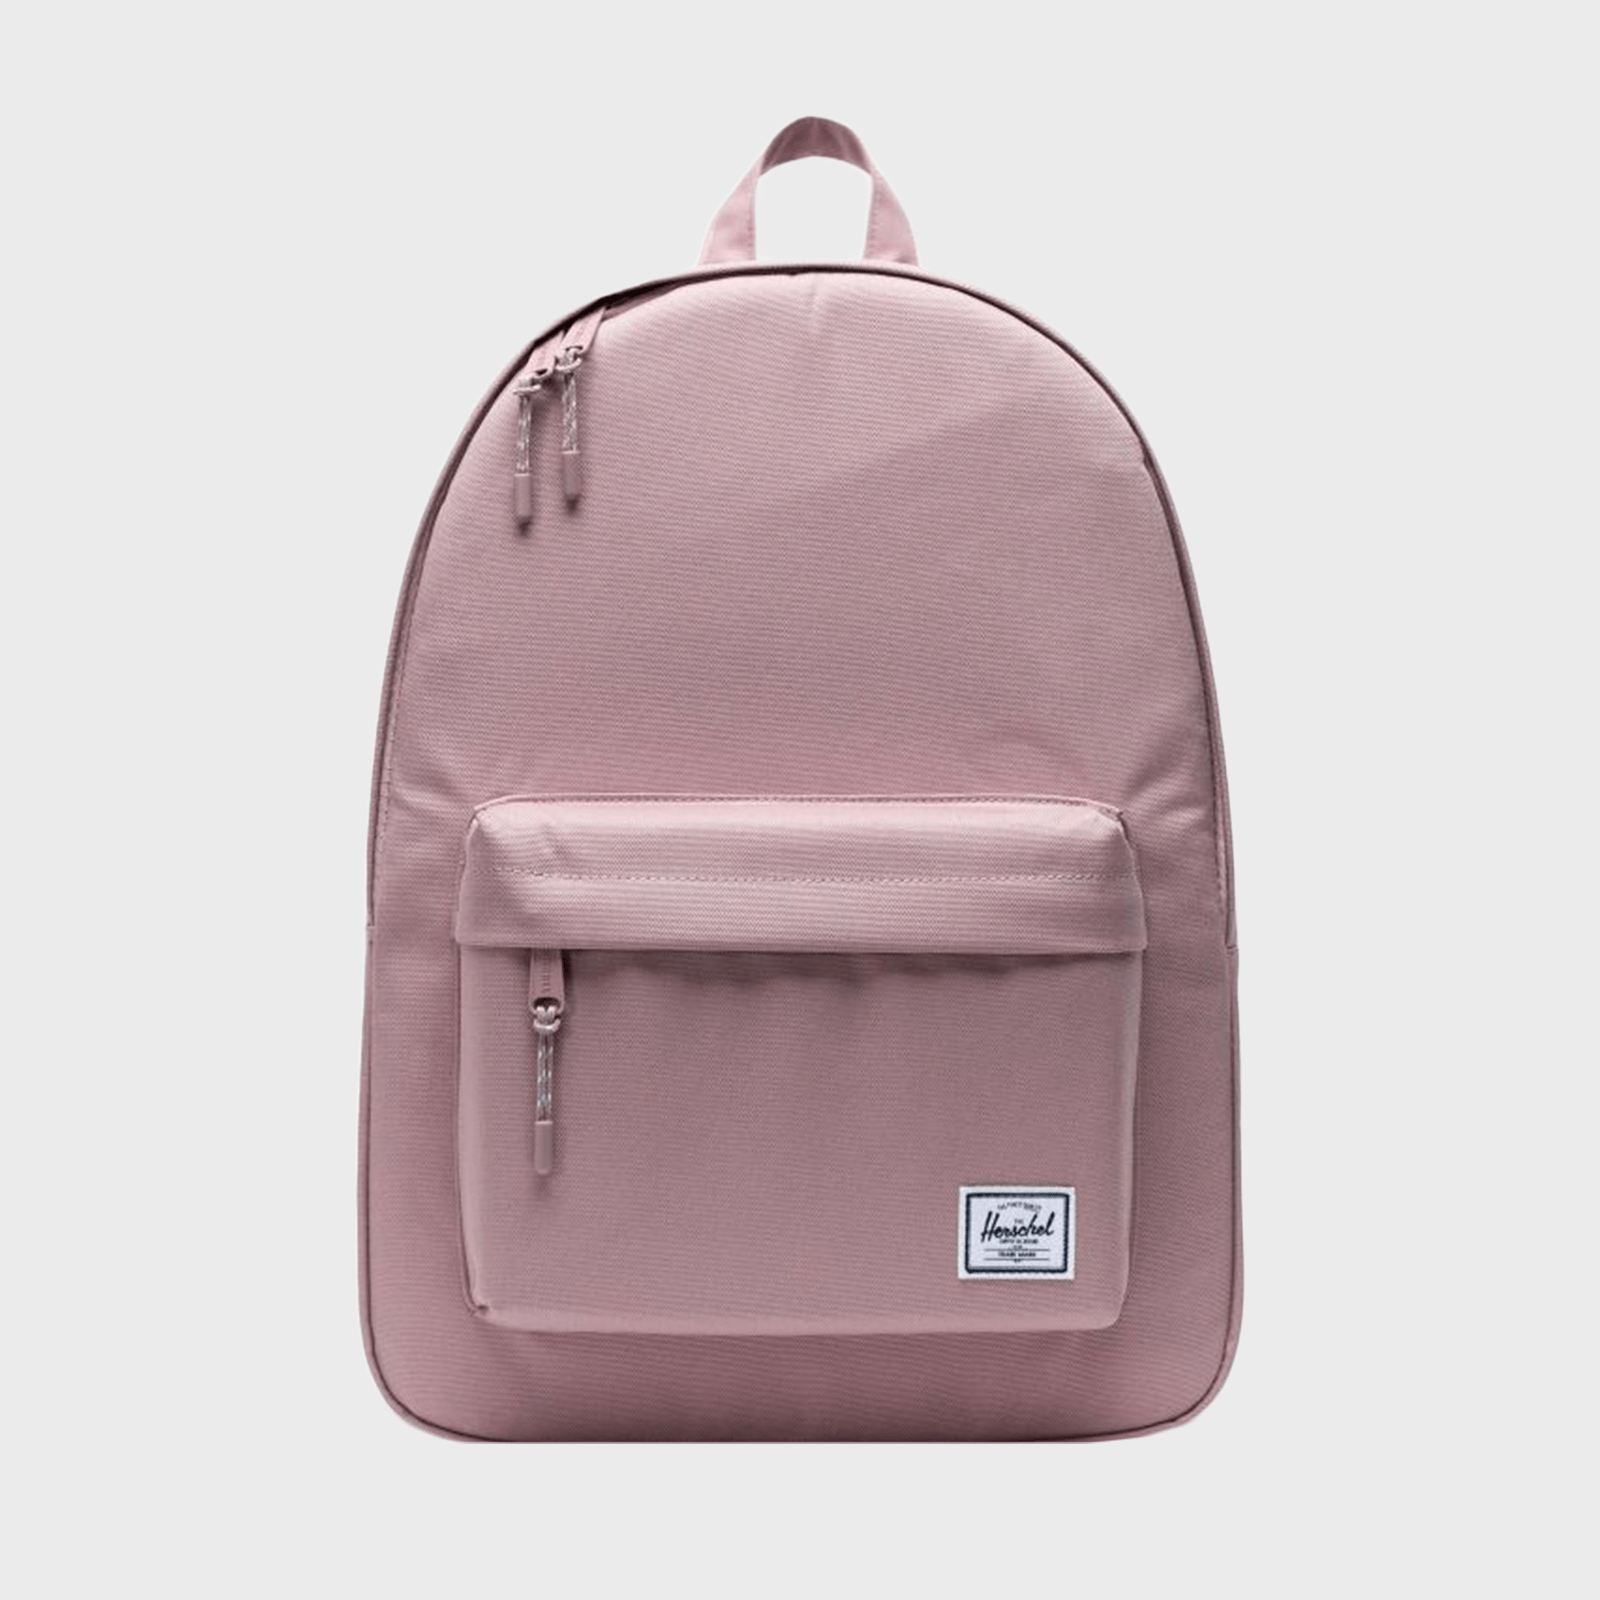 Best Backpacks for Every Day 2022 — School, Commuting, Travel